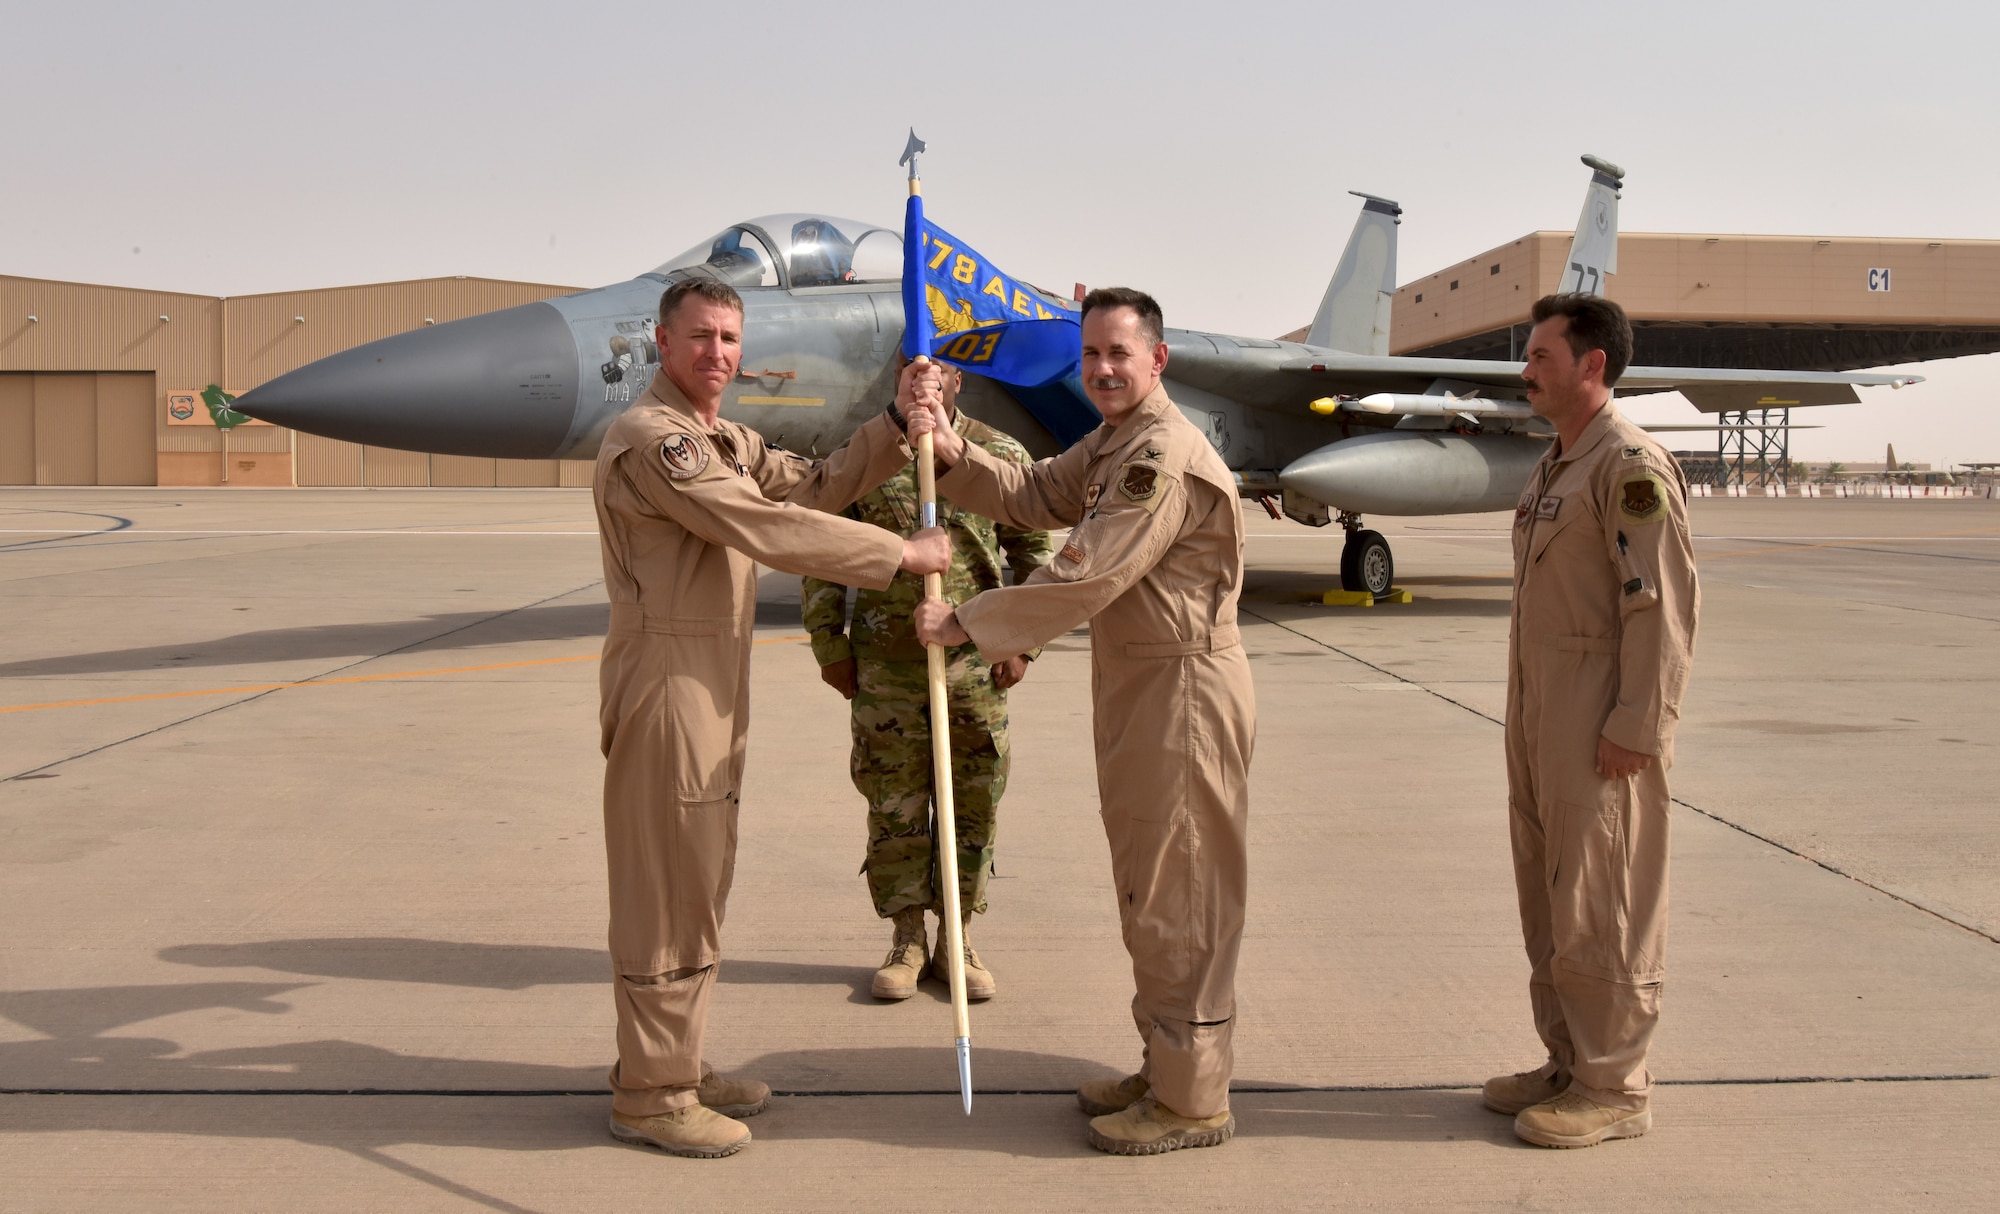 Col. Hurrelbrink, outgoing commander, relinquishes command of the 378th Expeditionary Operations Group to incoming commander, Col. Orgeron during the 378th EOG Change of Command Ceremony at Prince Sultan Air Base, Kingdom of Saudi Arabia.